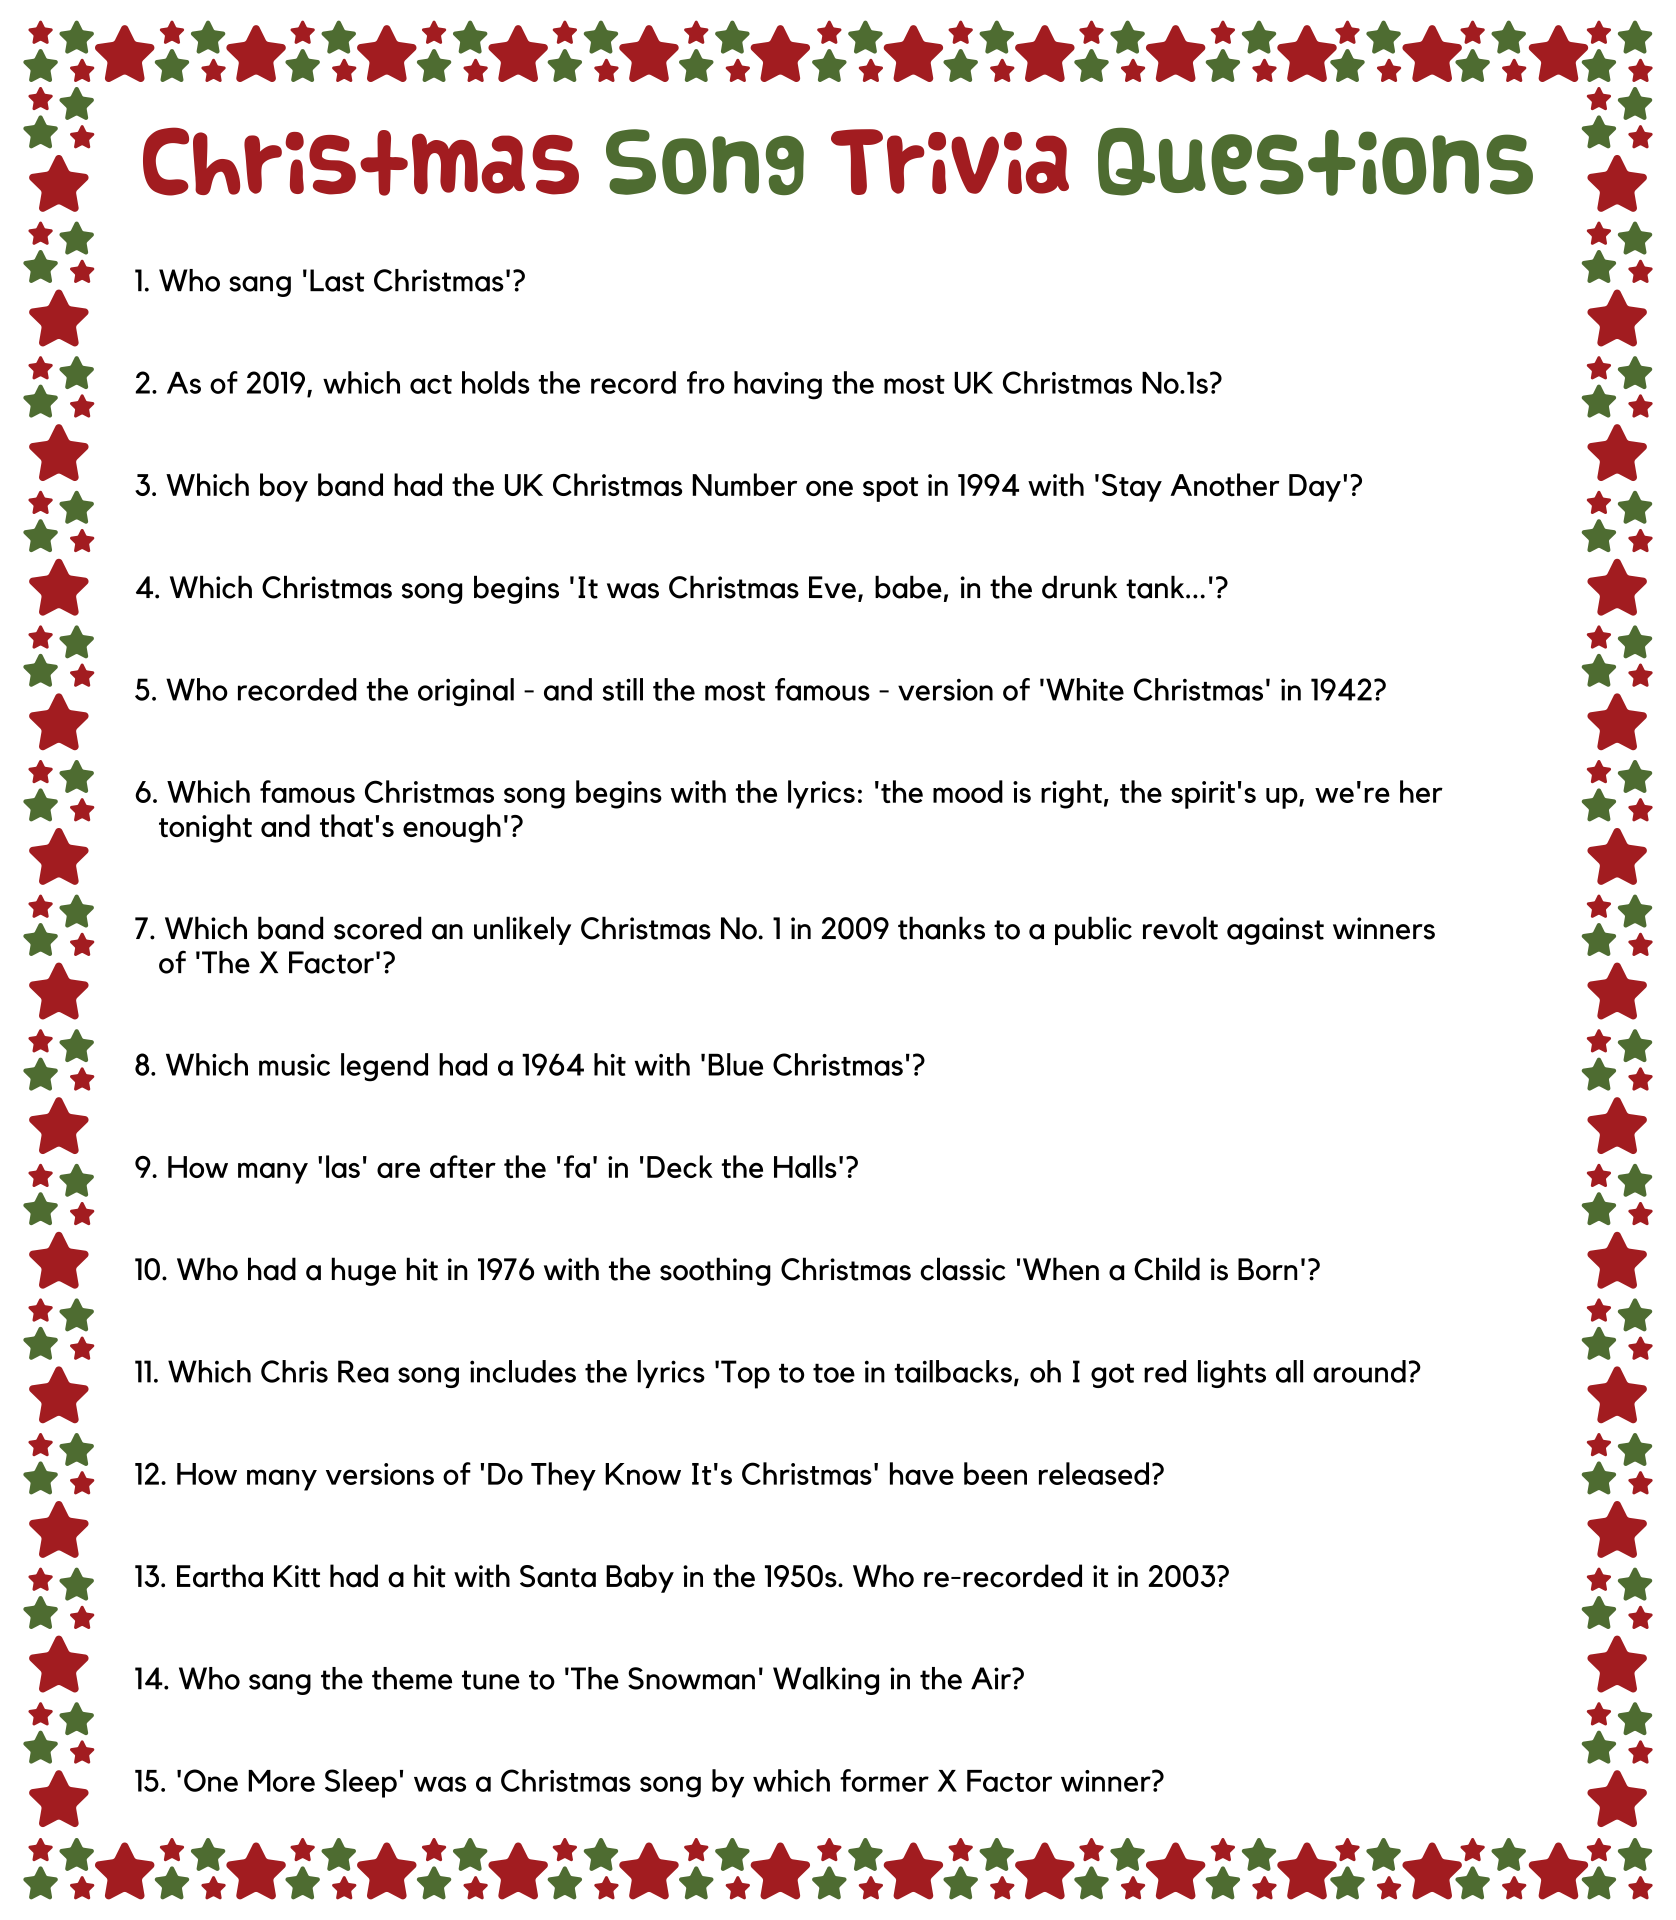 6-best-images-of-easy-christmas-trivia-printable-free-printable